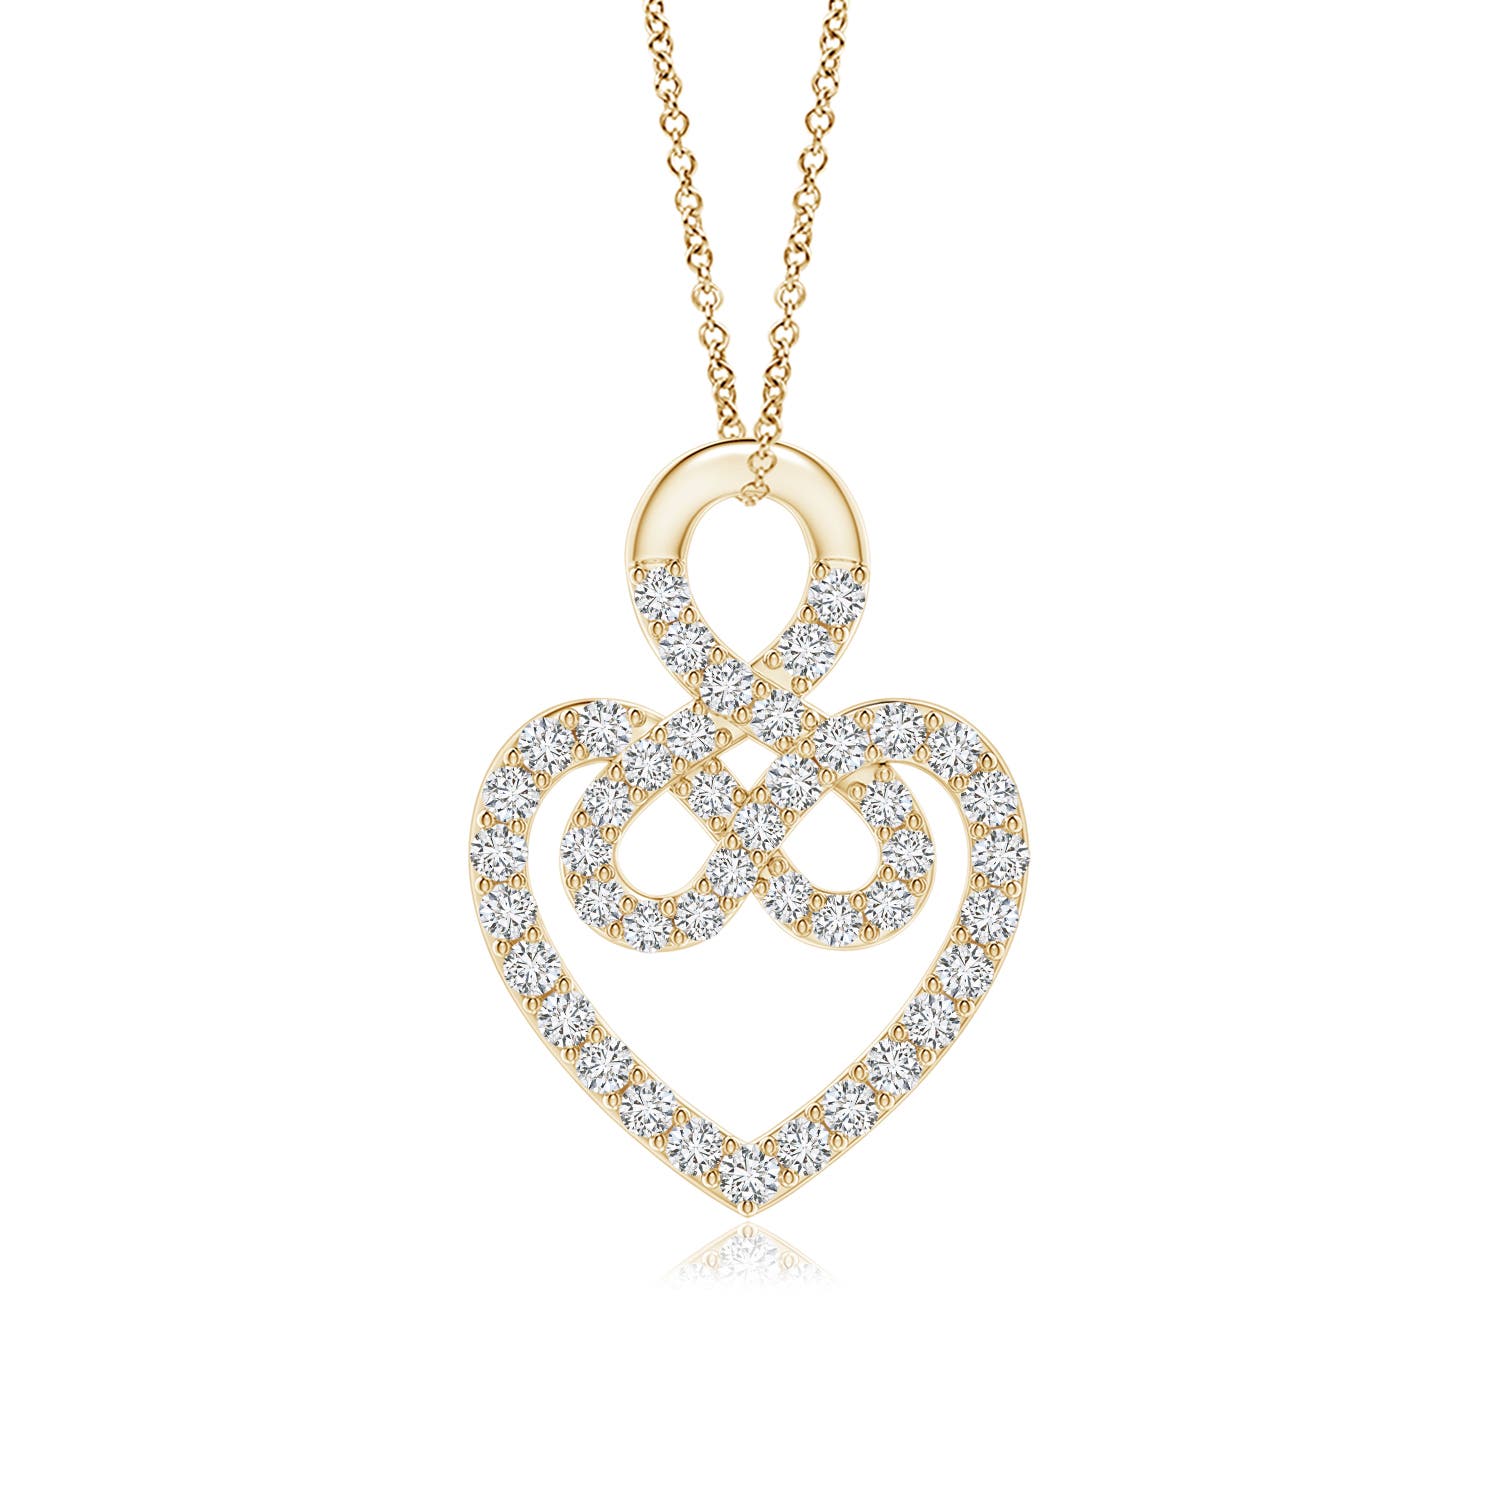 H, SI2 / 0.2 CT / 14 KT Yellow Gold